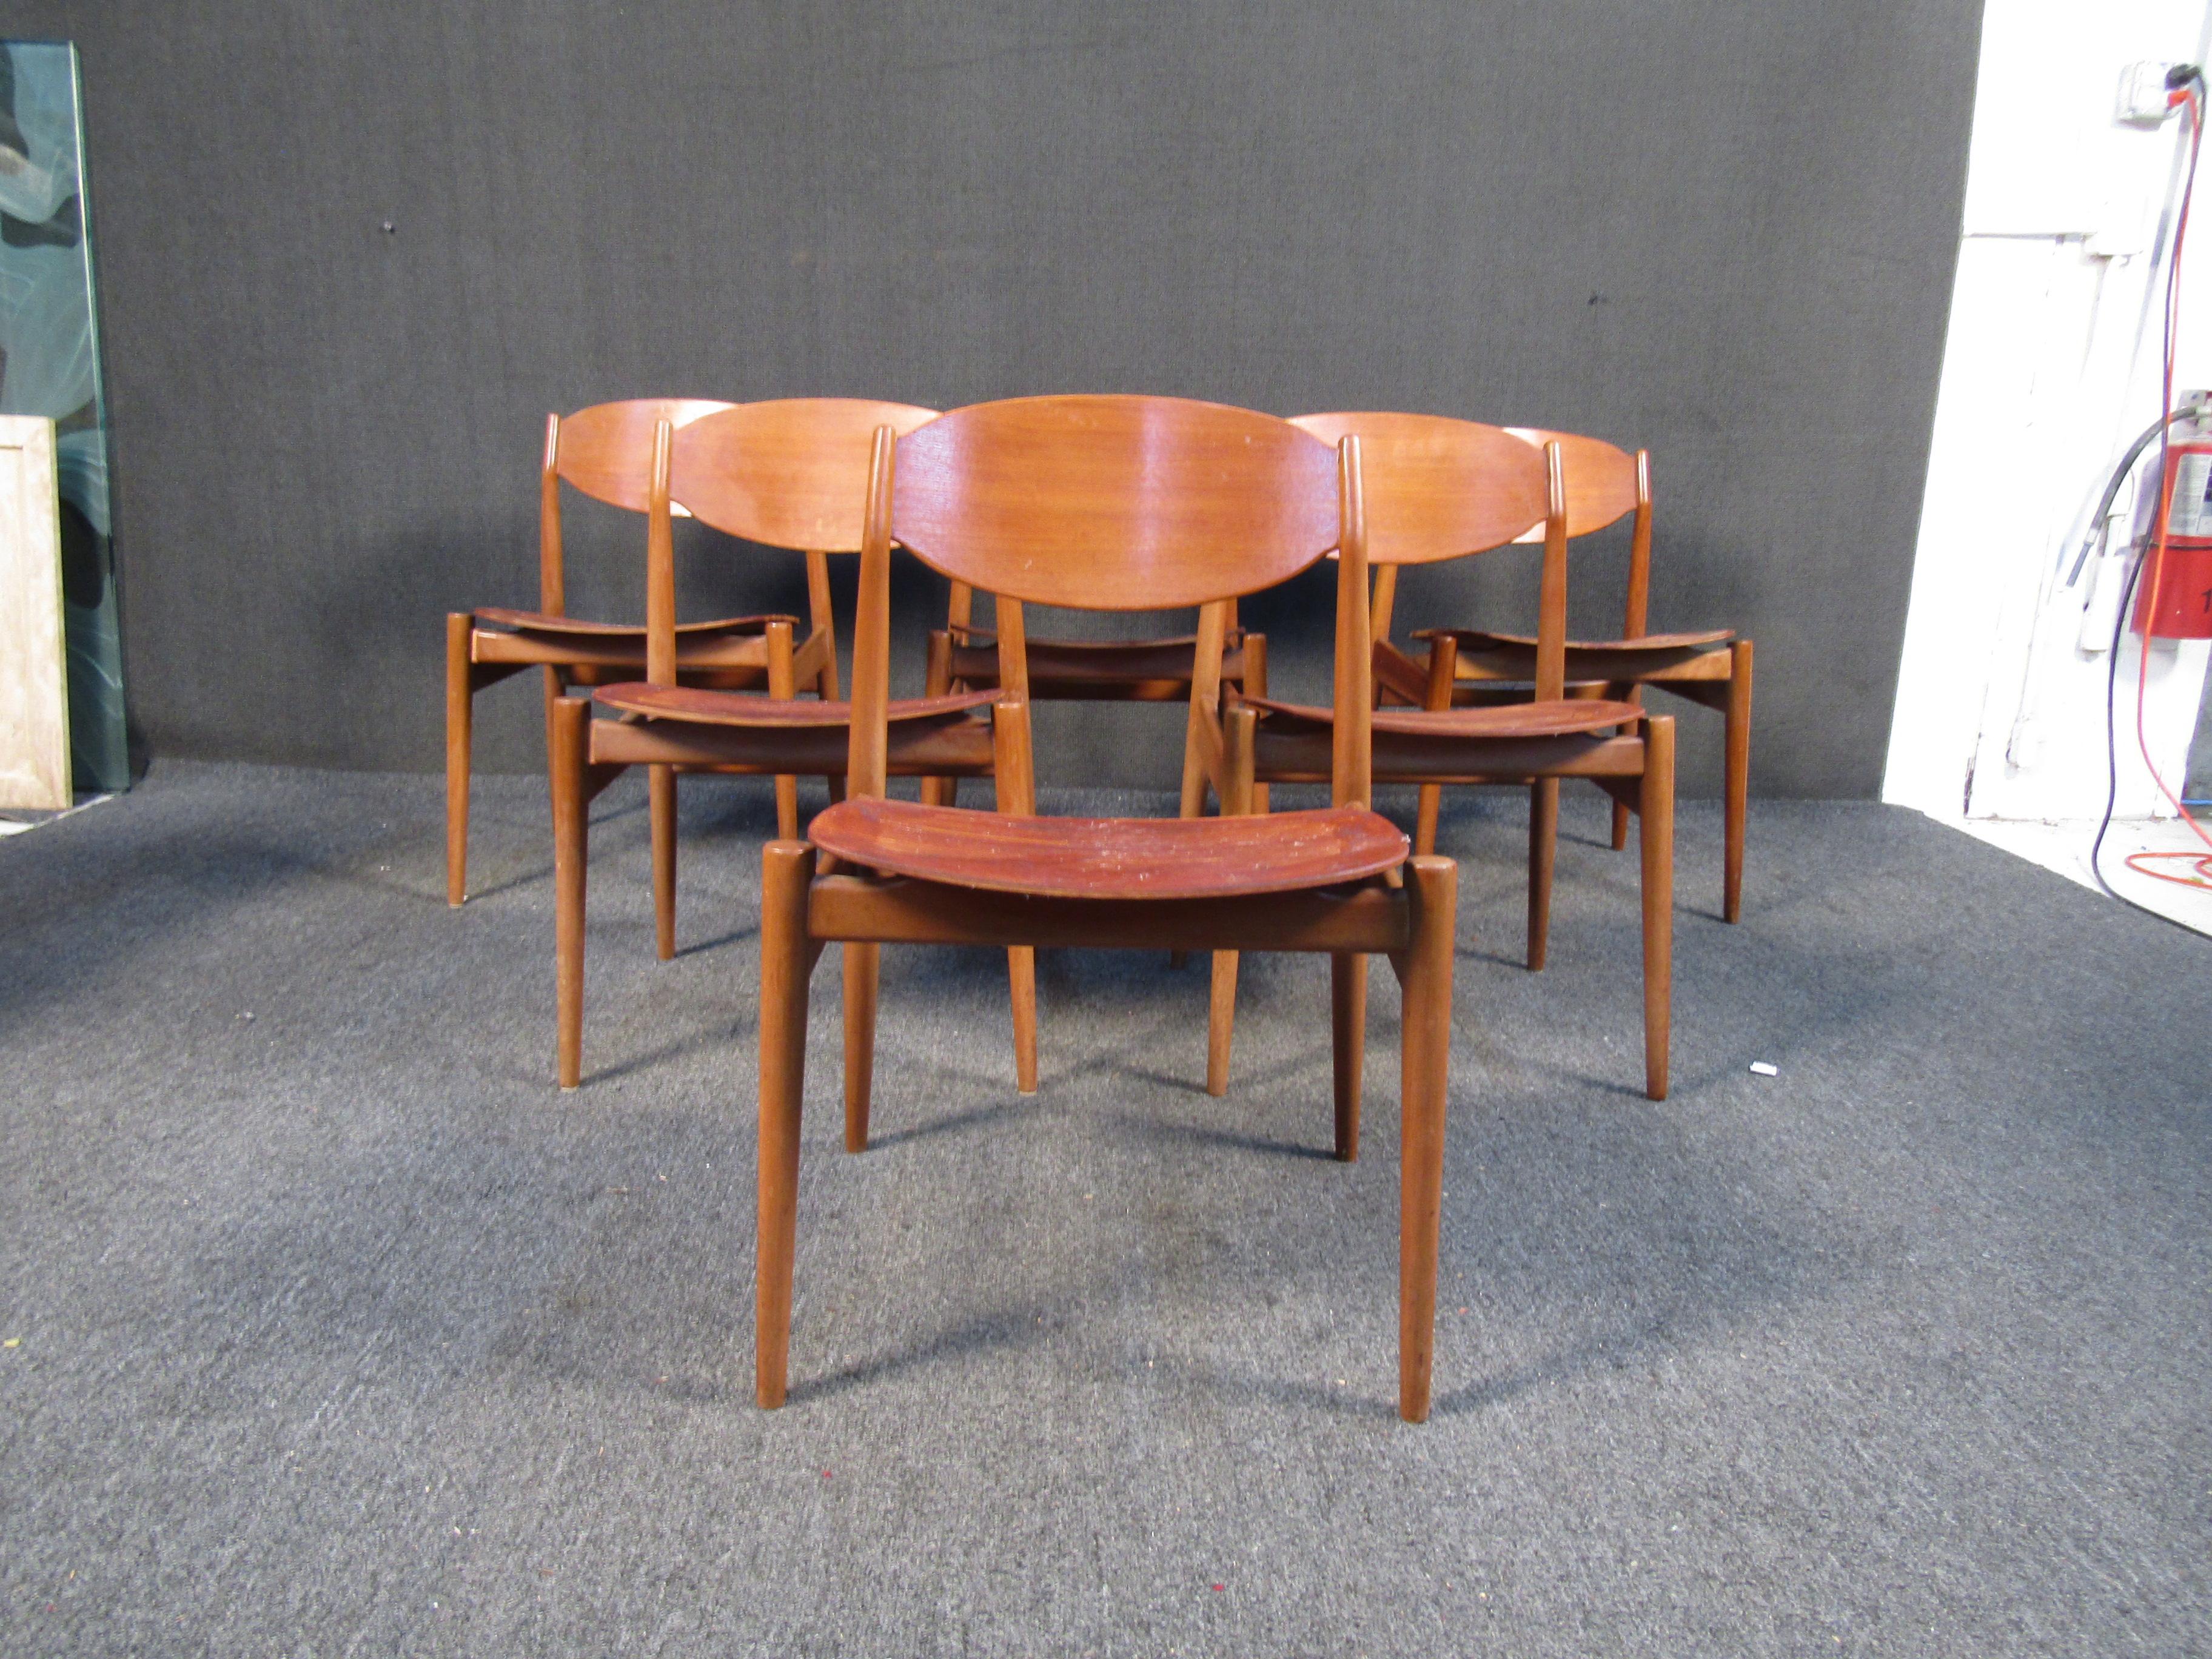 ( 6 ) Vintage Teak Danish dining chairs. These beautifully constructed dining chairs feature an all teak construction, contoured seat and back rests as well as tapered legs. These chairs have had all fabric removed, and they are ready for